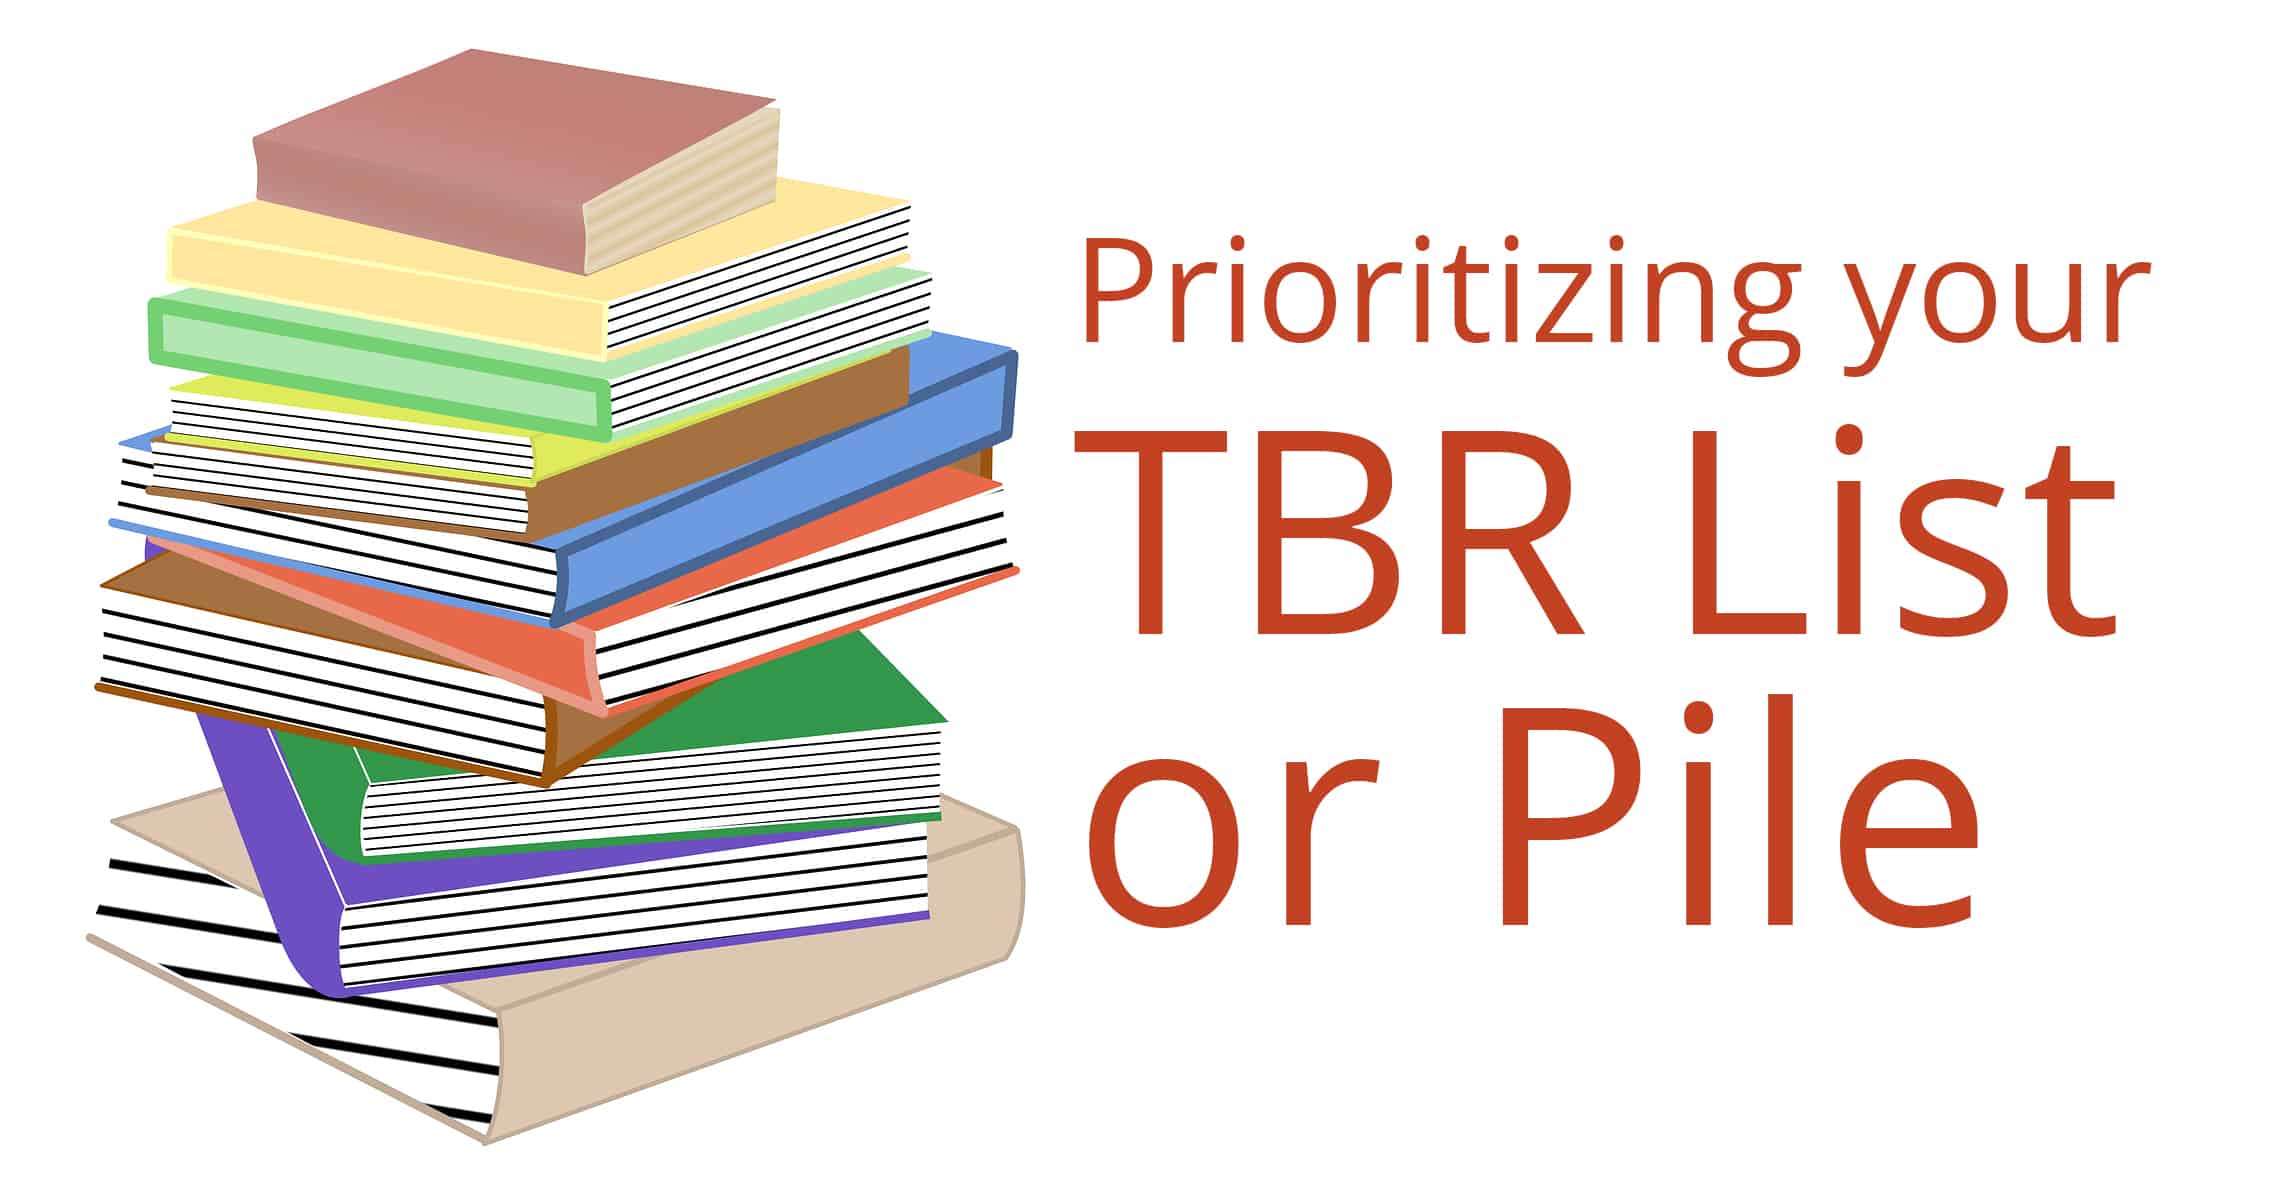 Prioritizing your TBR List or Pile